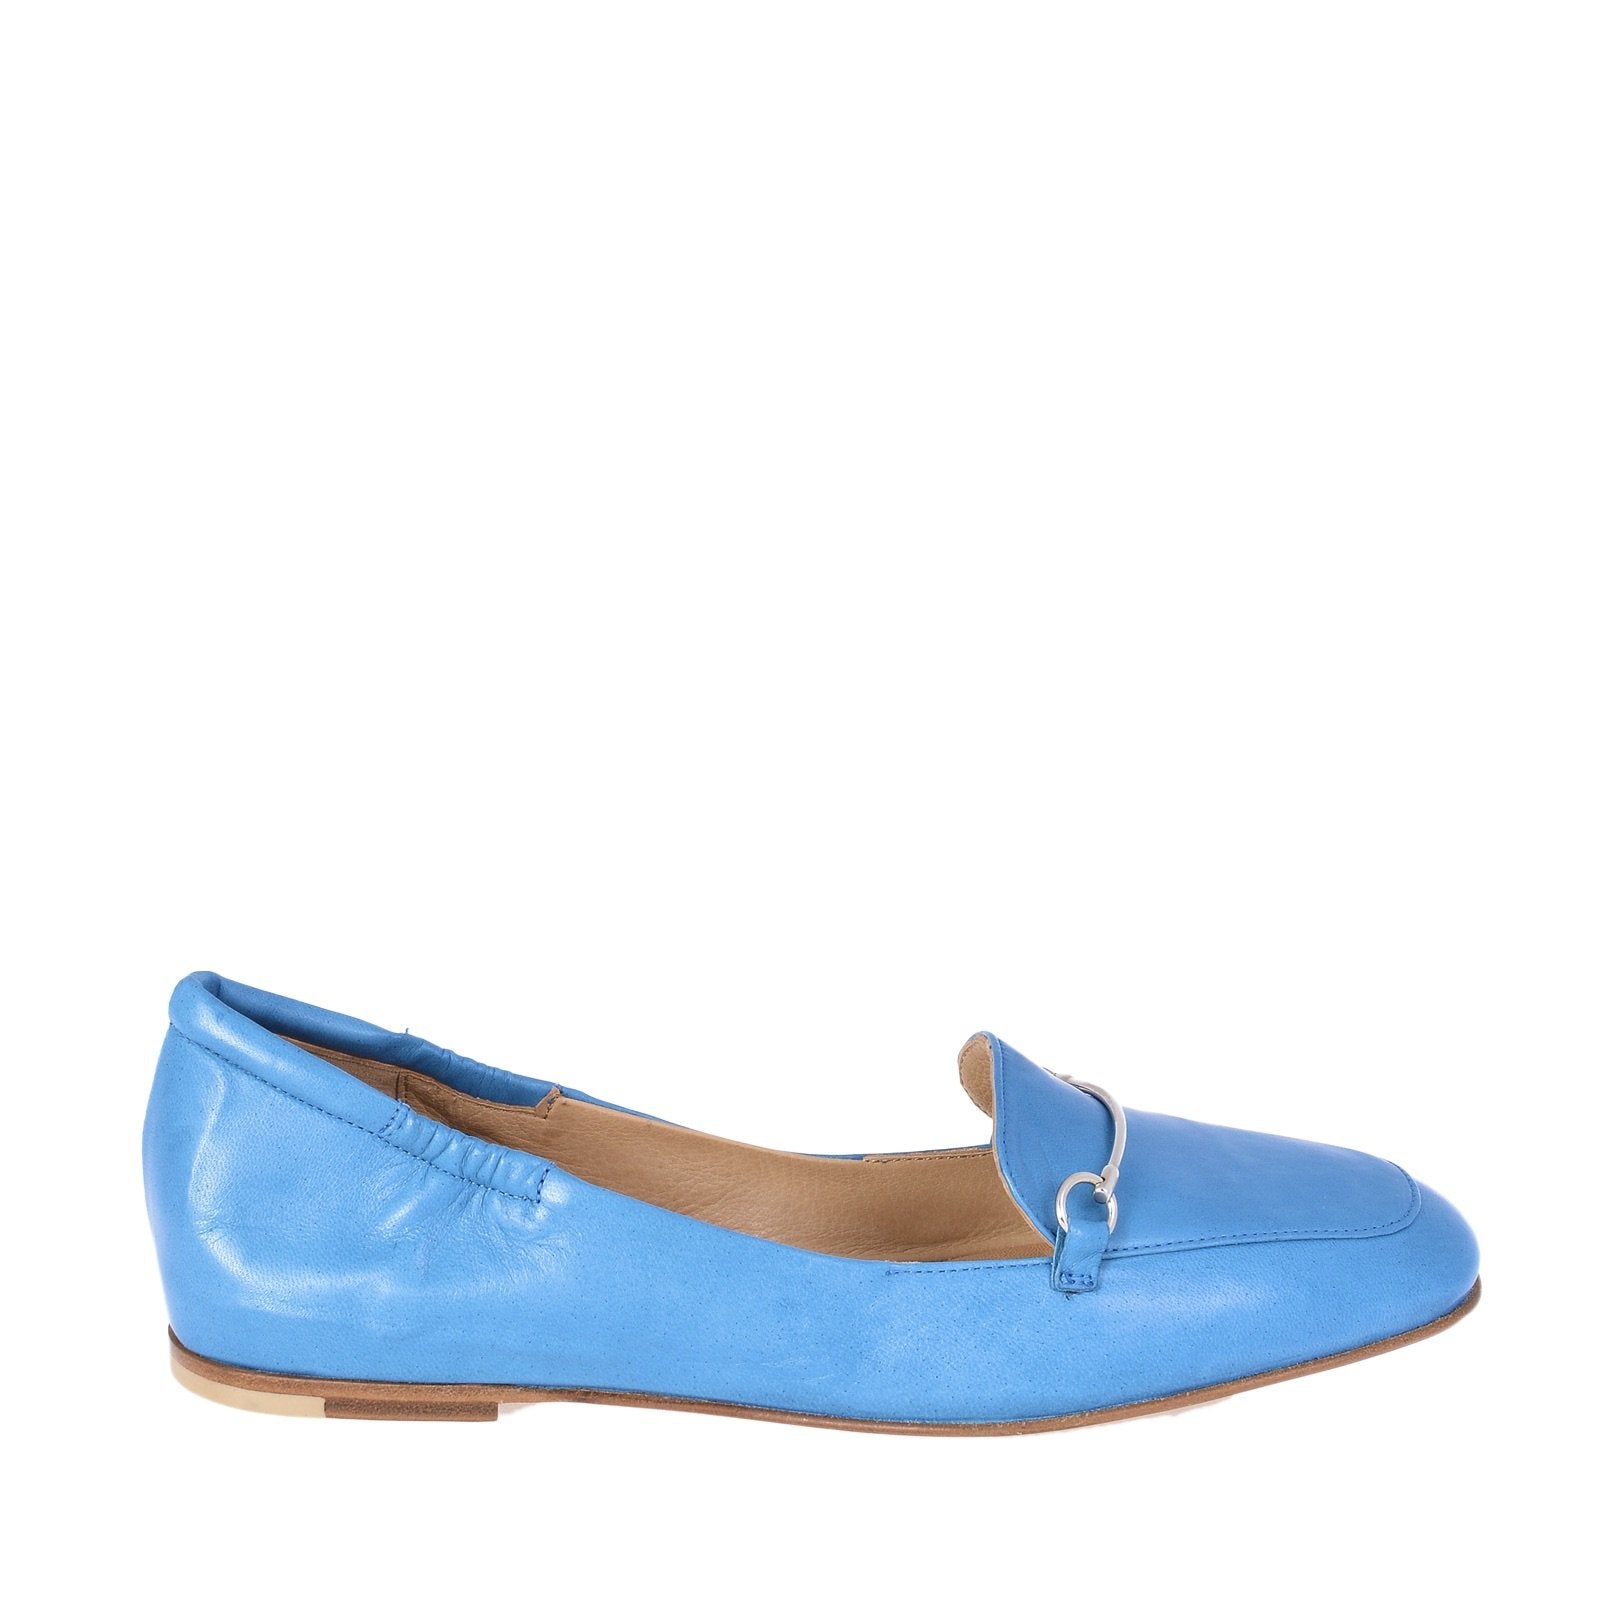 Lena Light Blue Leather Loafers Flats 1144PUNICE - 1